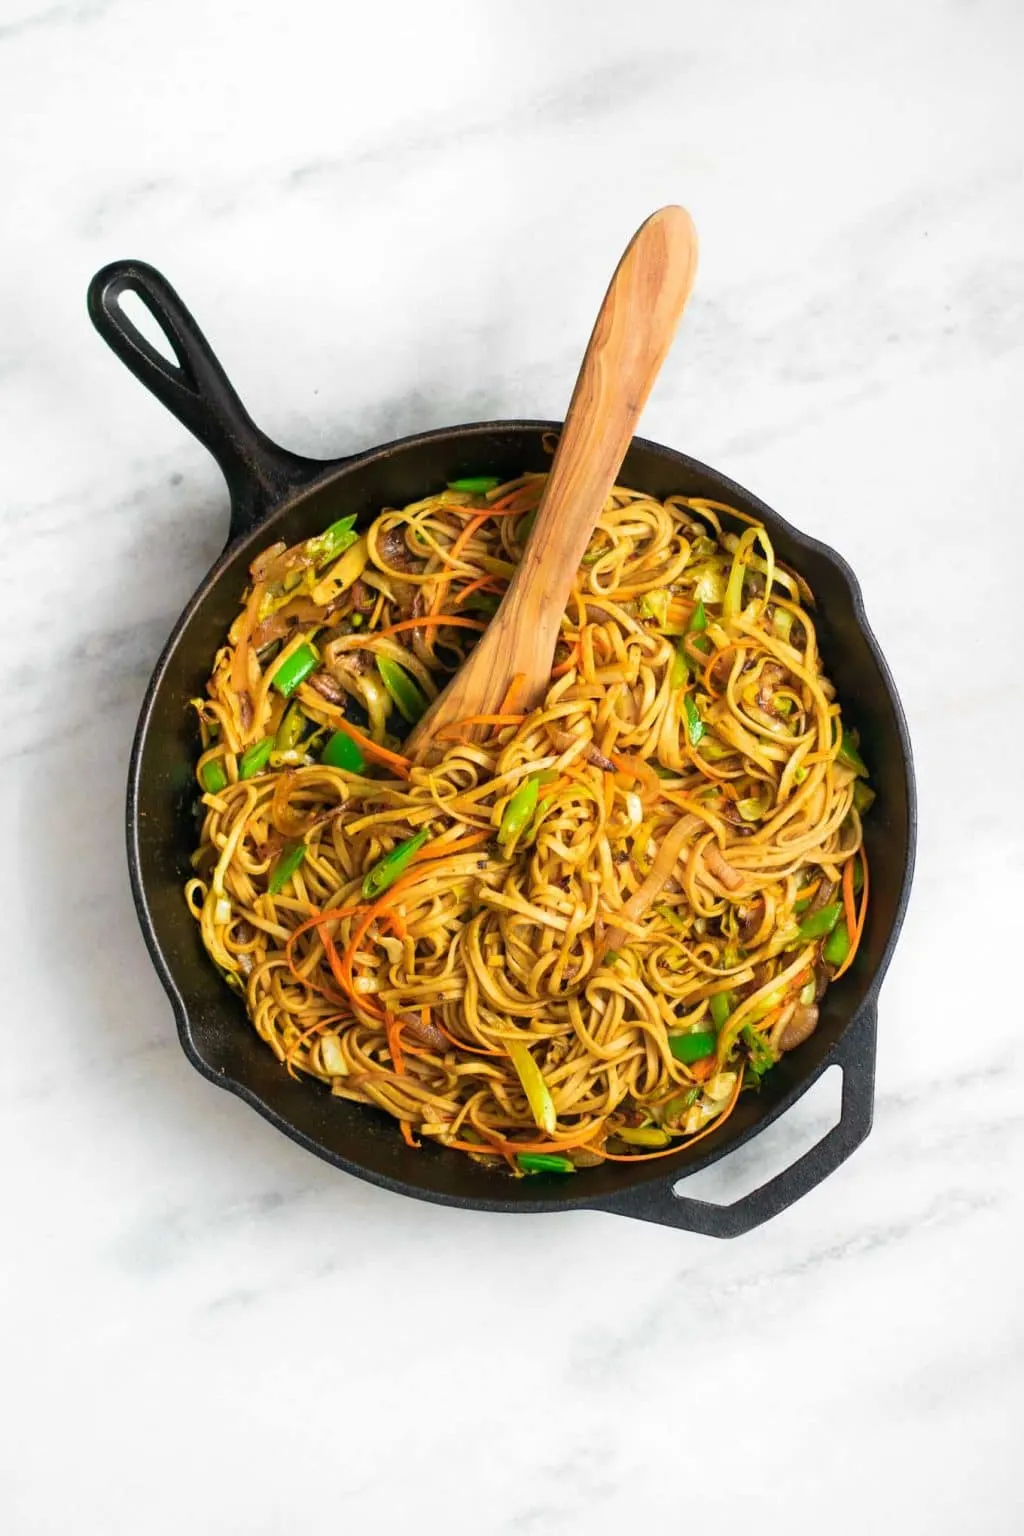 vegan singapore noodles made not traditionally with udon noodles in a cast iron skillet